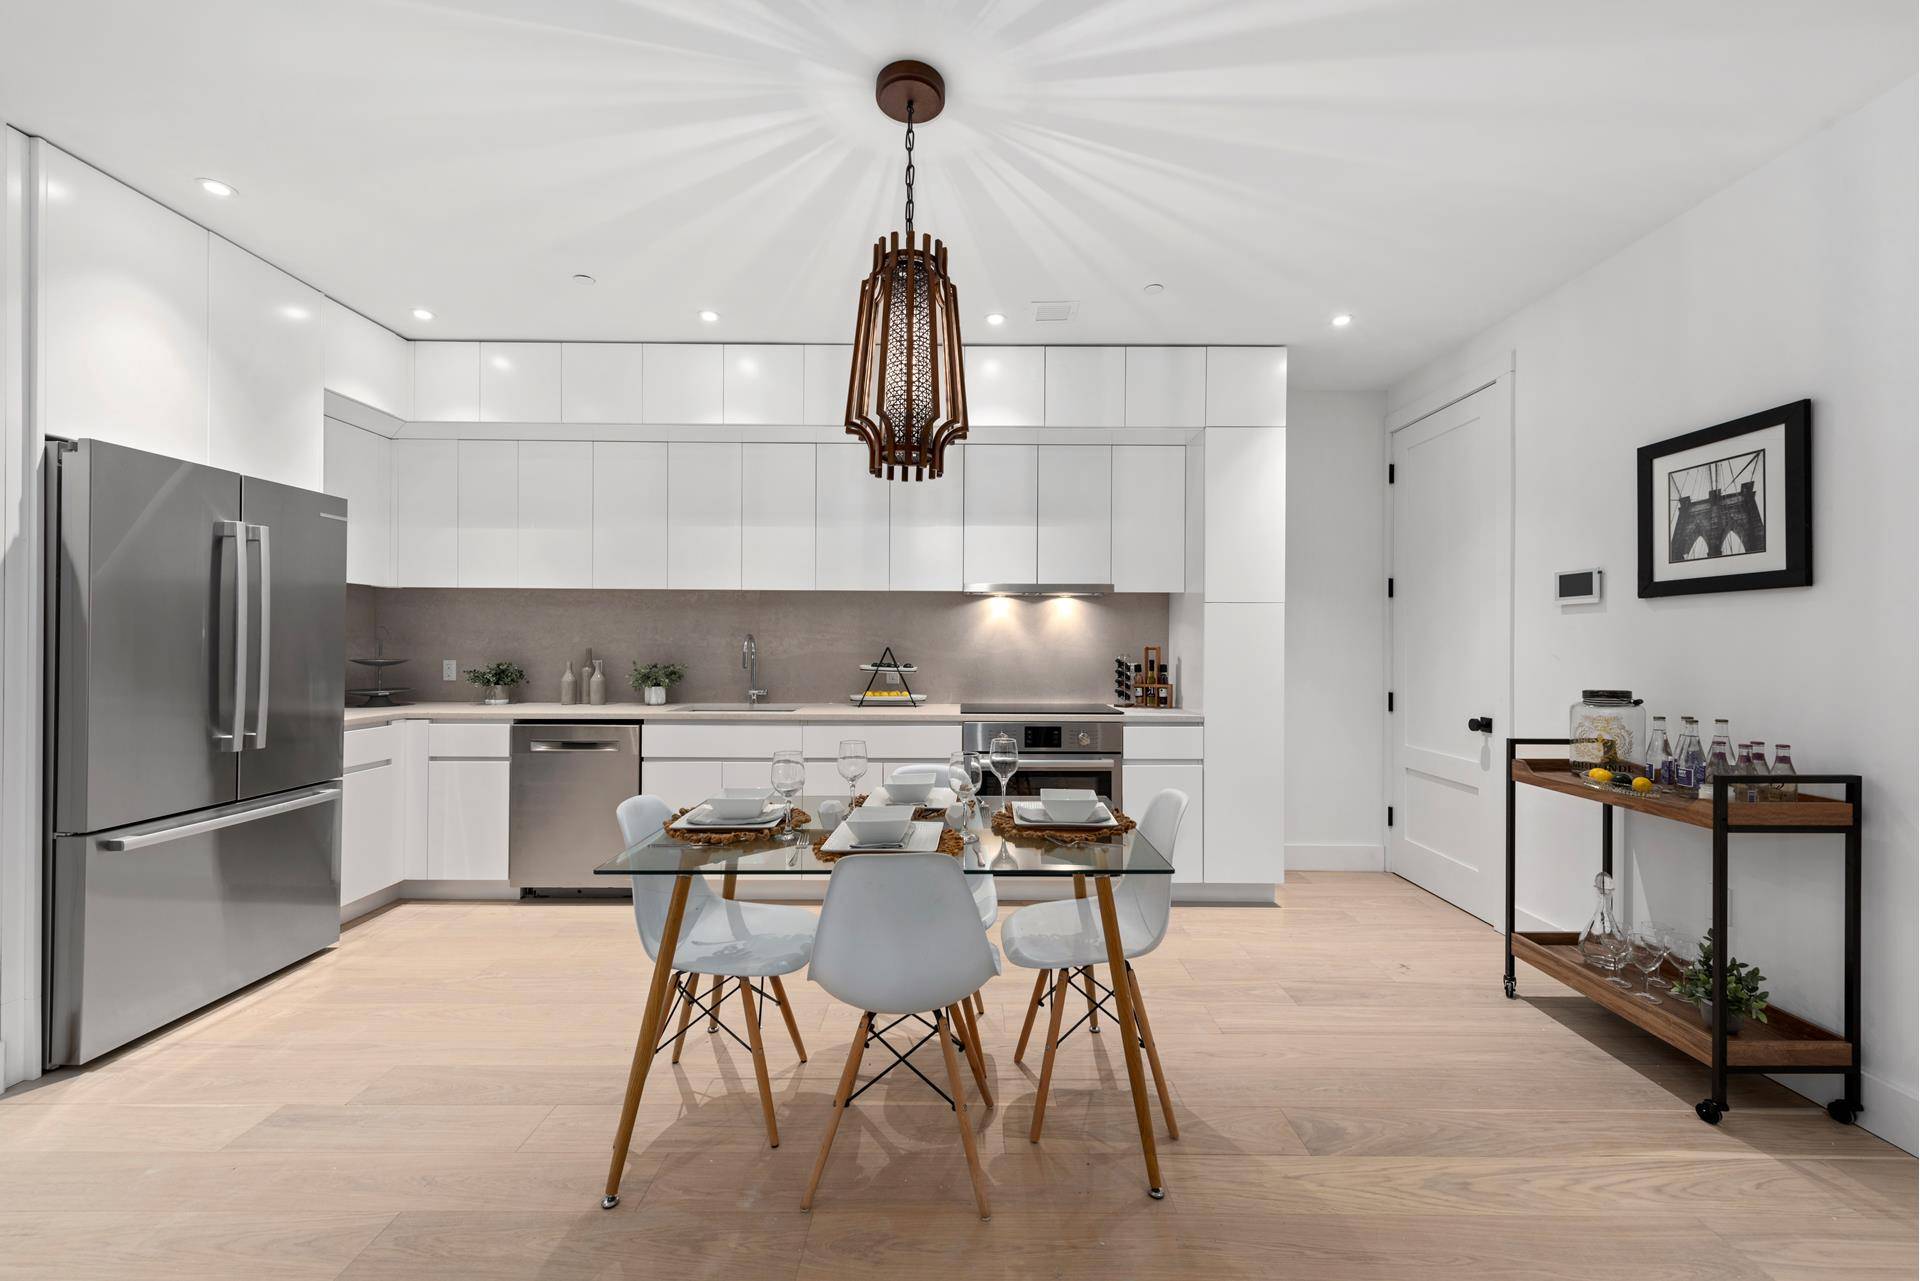 MODEL UNITS AVAILABLE FOR VIEWING OCCUPANCY Q1 2021 Alfred on Fleet, 112 Fleet Place An exclusive opportunity awaits at the brand new Alfred on Fleet an innovative, ground up 12 ...